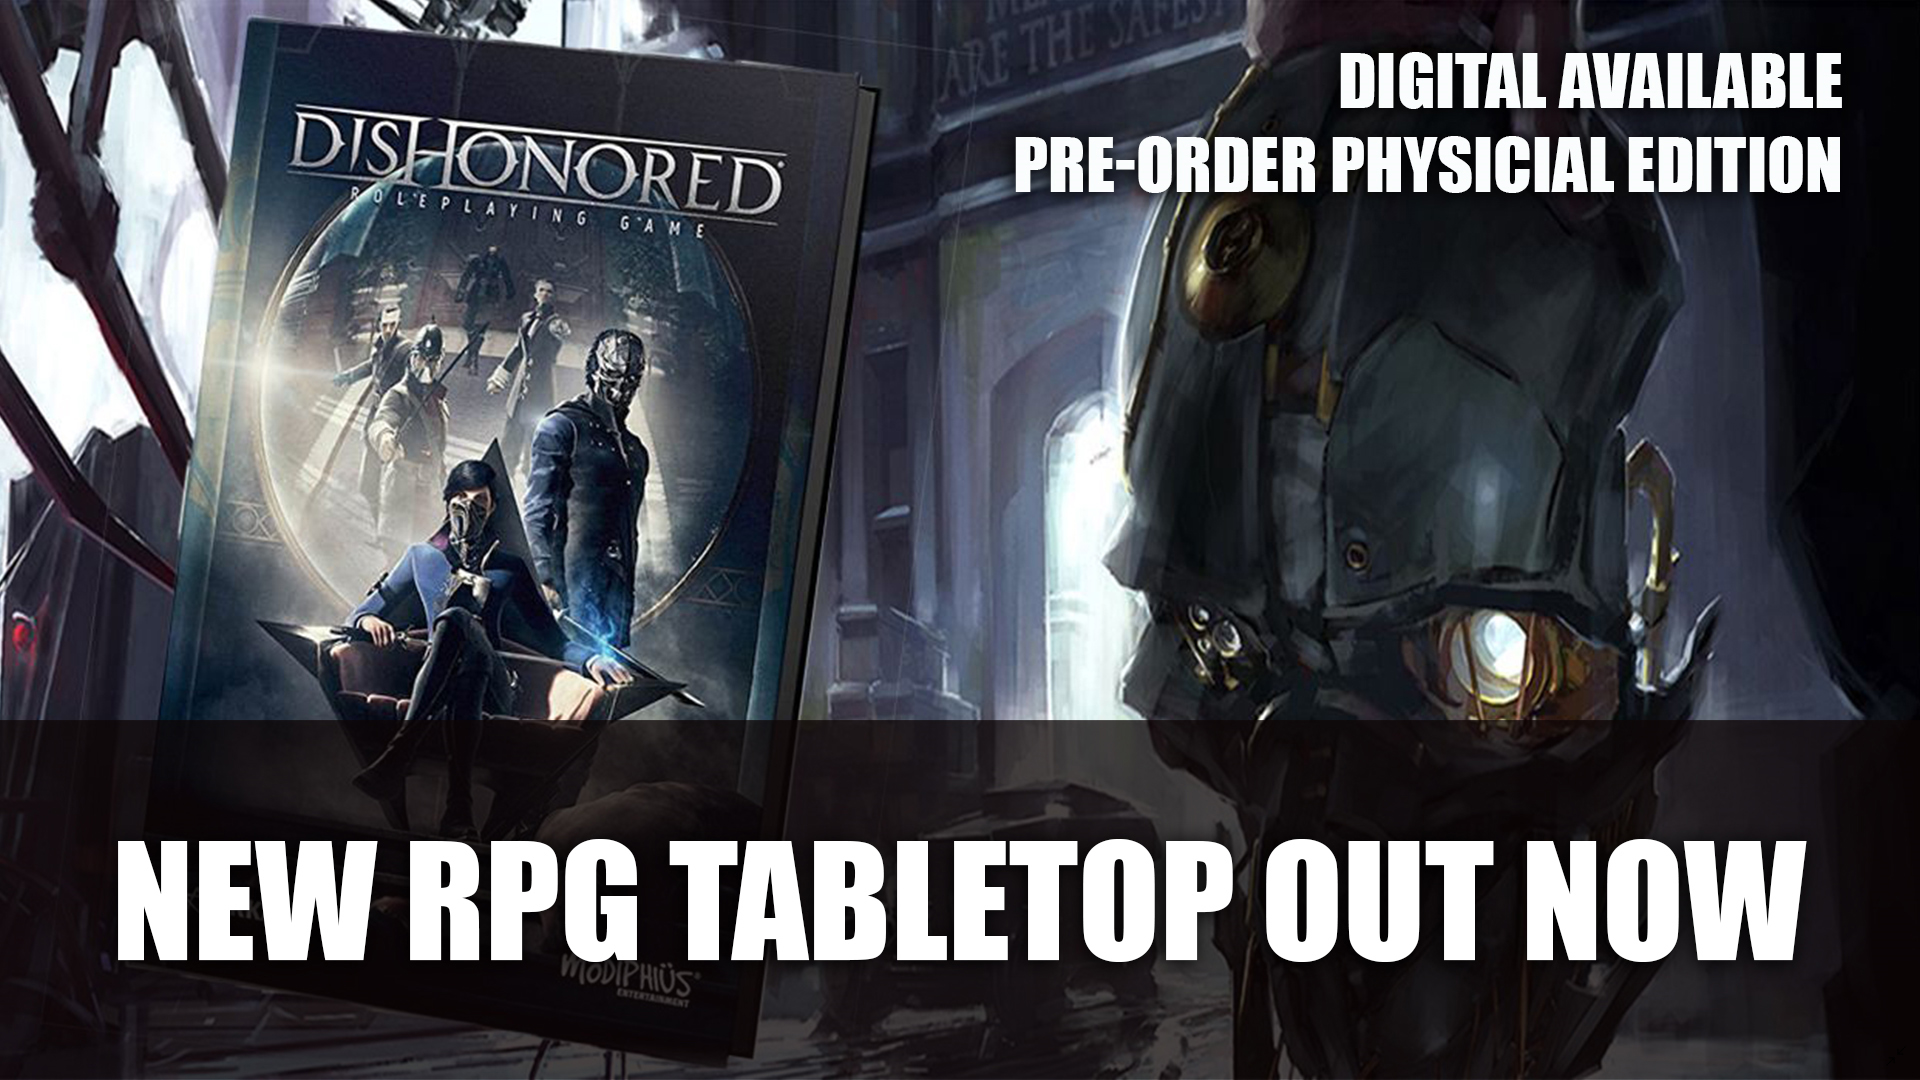 Dishonored: The Role-Playing Game is a New Tabletop Out Now - Fextralife